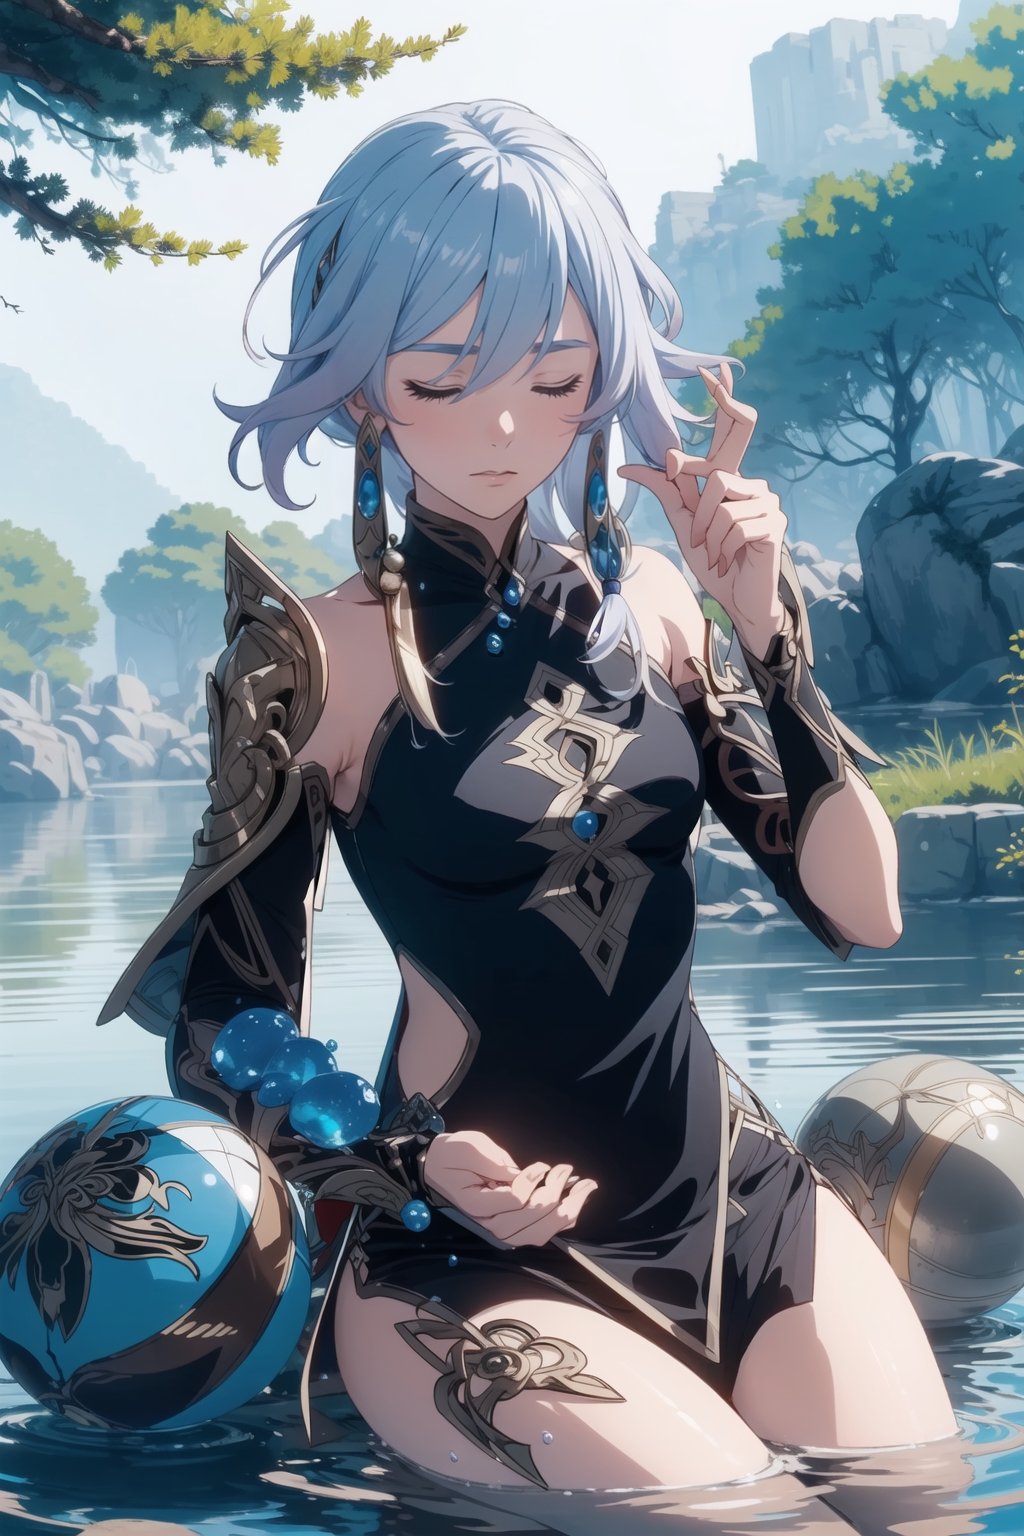 2d, masterpiece, best quality, anime, highly detailed face, highly detailed background, perfect lighting, solo, Sitting on a stone, surrounded by water, in a lake, meditating, eyes closed, blue hair, meditation pose, (Ball-shaped floating water around:1.3), blue warrior clothes with black, background waterfall, nature, forest,fu hua